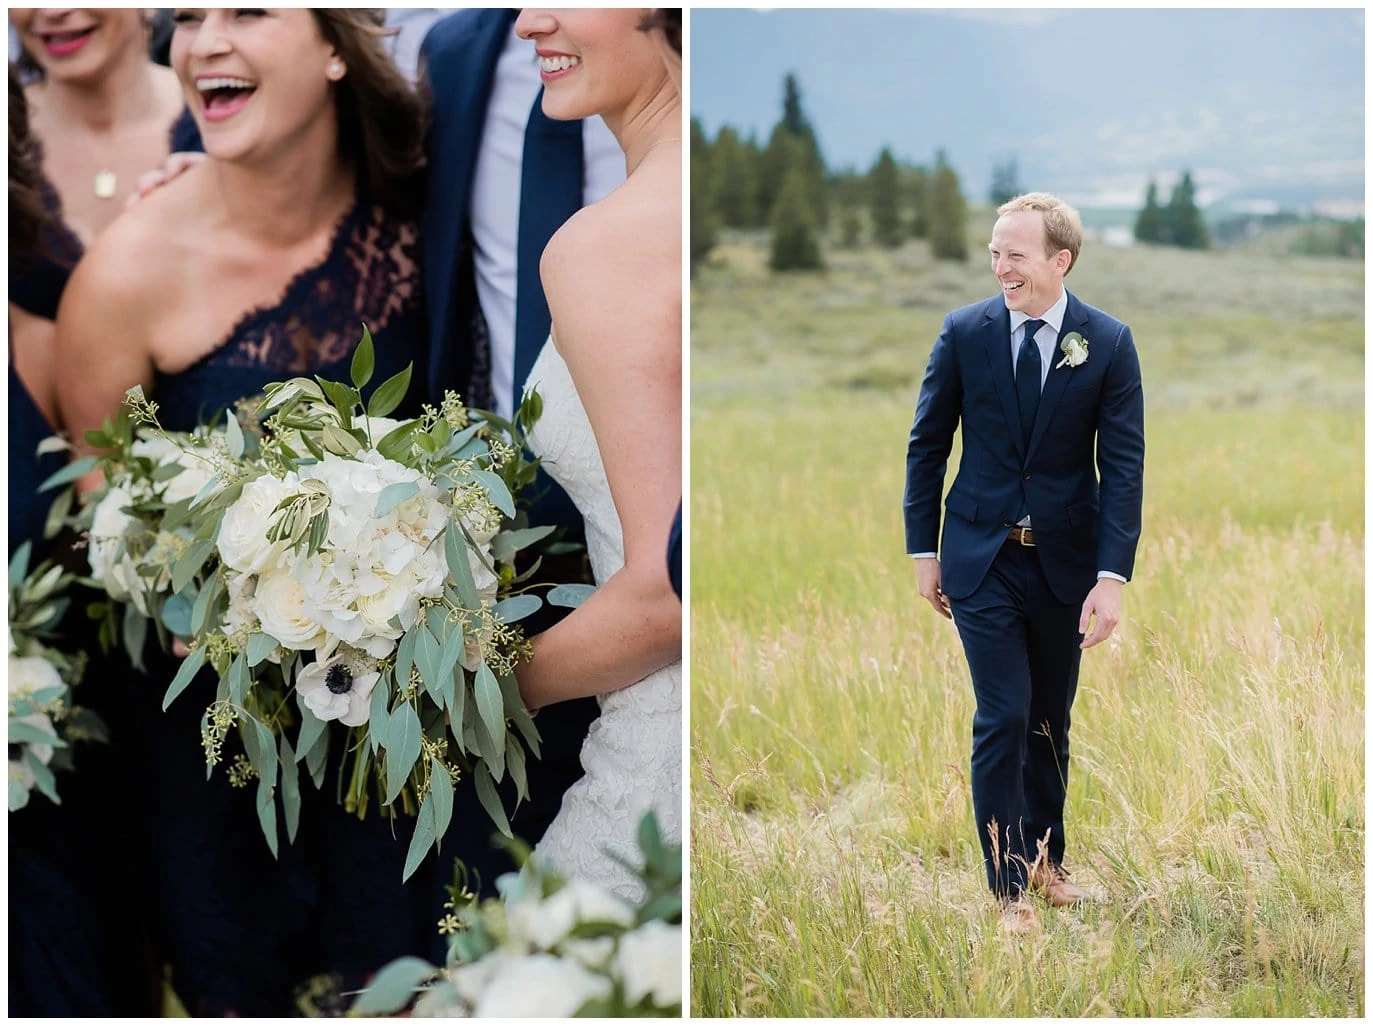 laughing groom in navy suit at Arapahoe Basin Black Mountain Lodge Wedding by Denver Wedding Photographer Jennie Crate